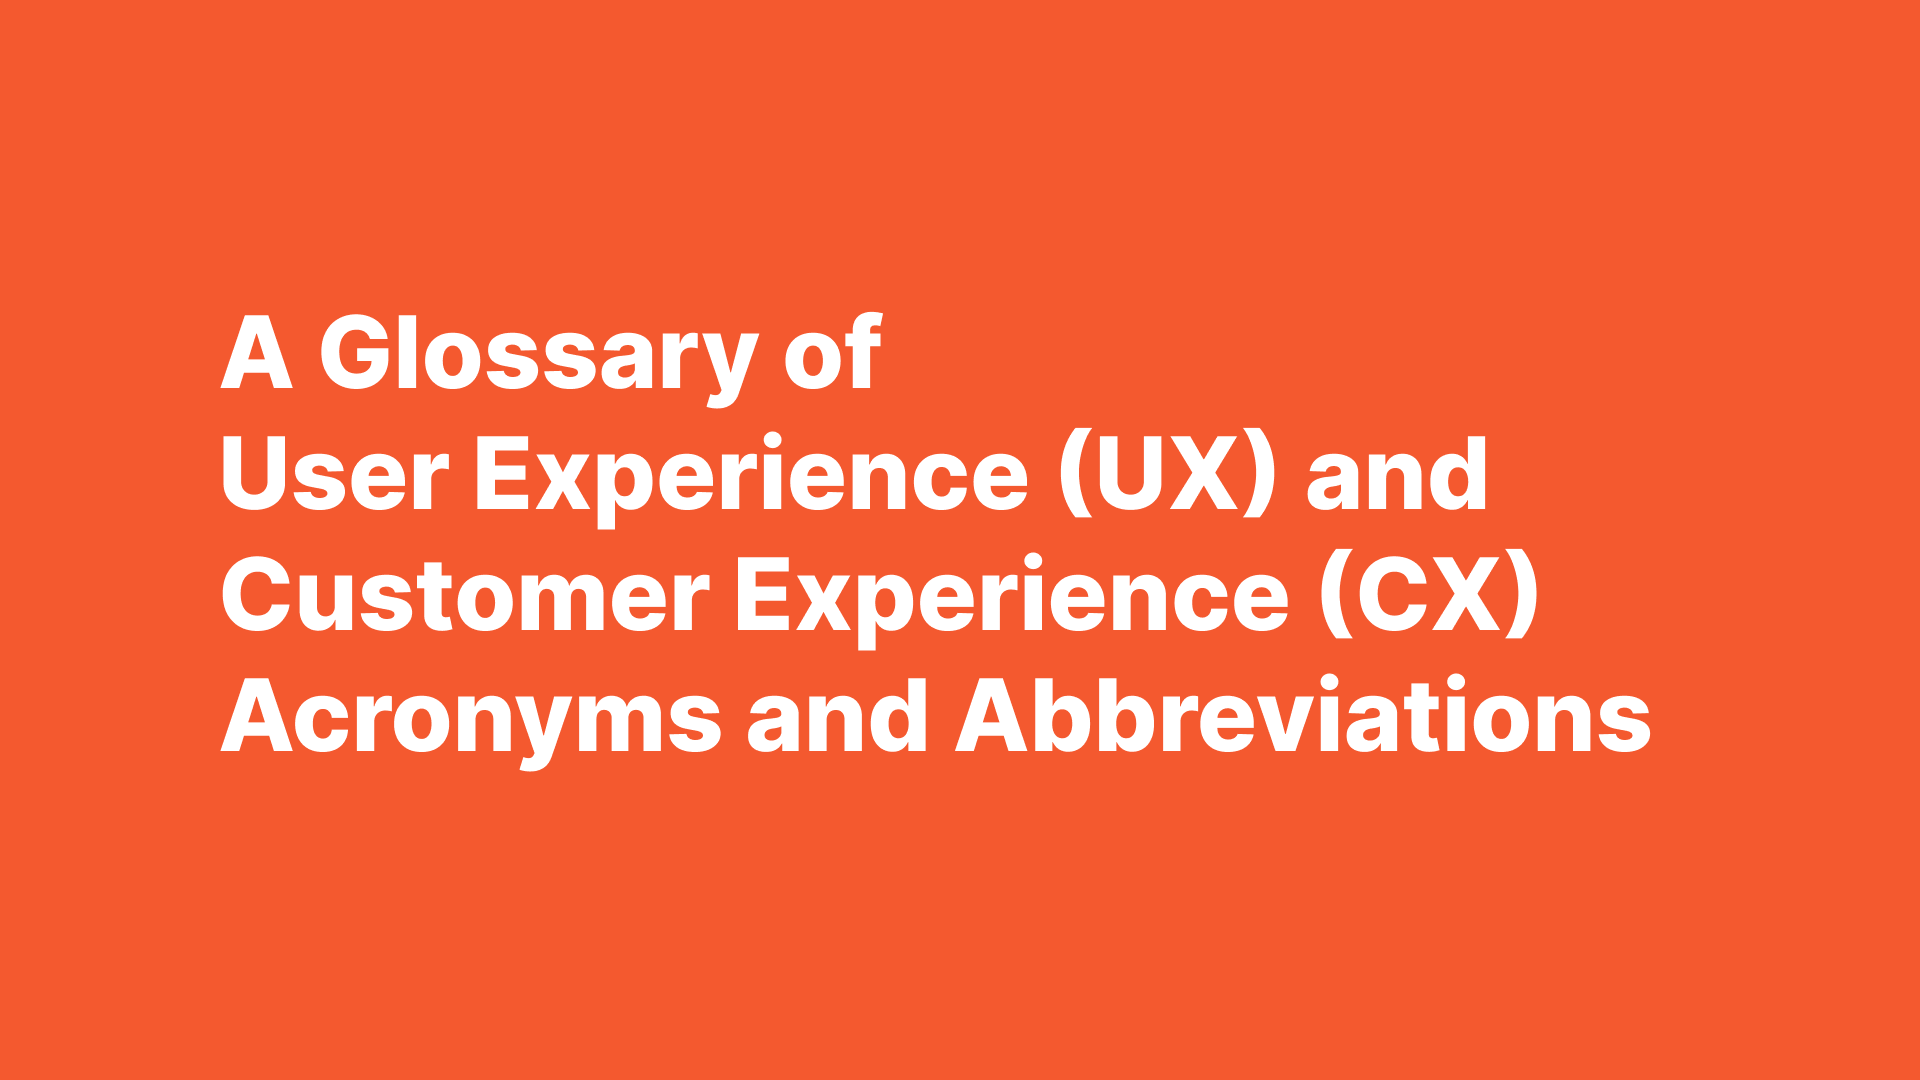 A Glossary of User Experience (UX) and Customer Experience (CX) Acronyms and Abbreviations